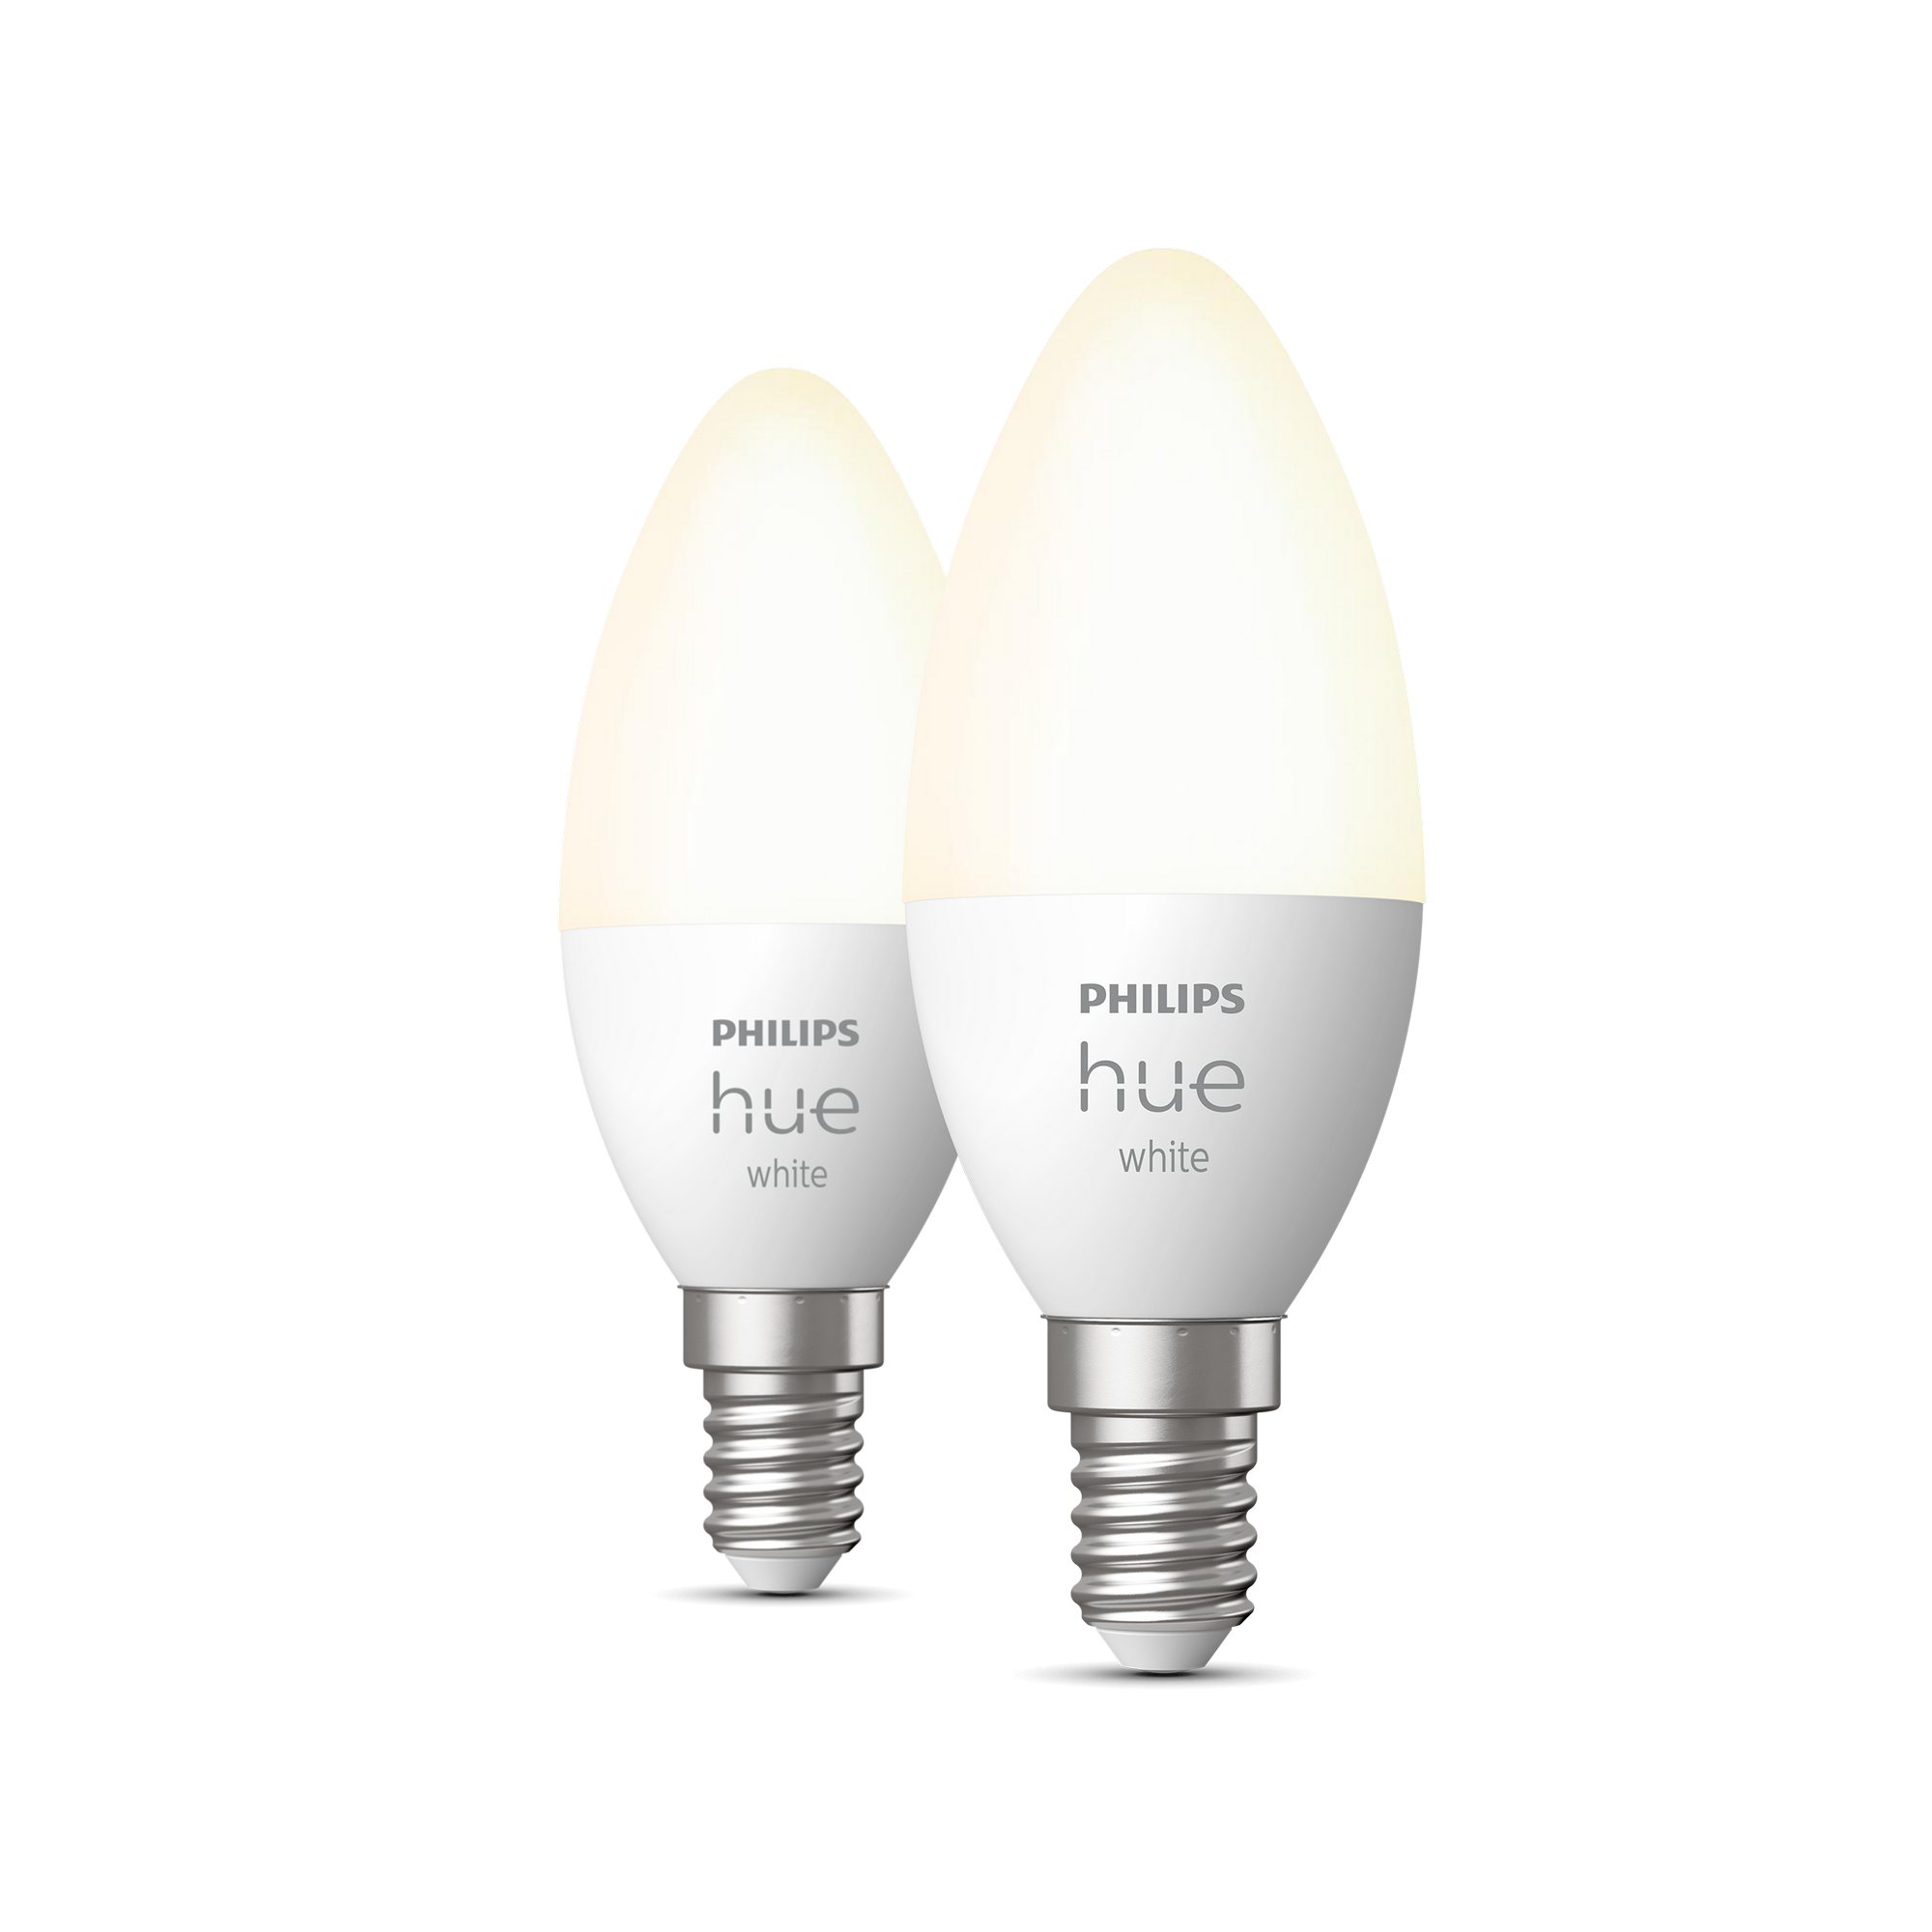 LED-Lampe 'Hue White' E14 5,5 W, 2er-Pack + product picture